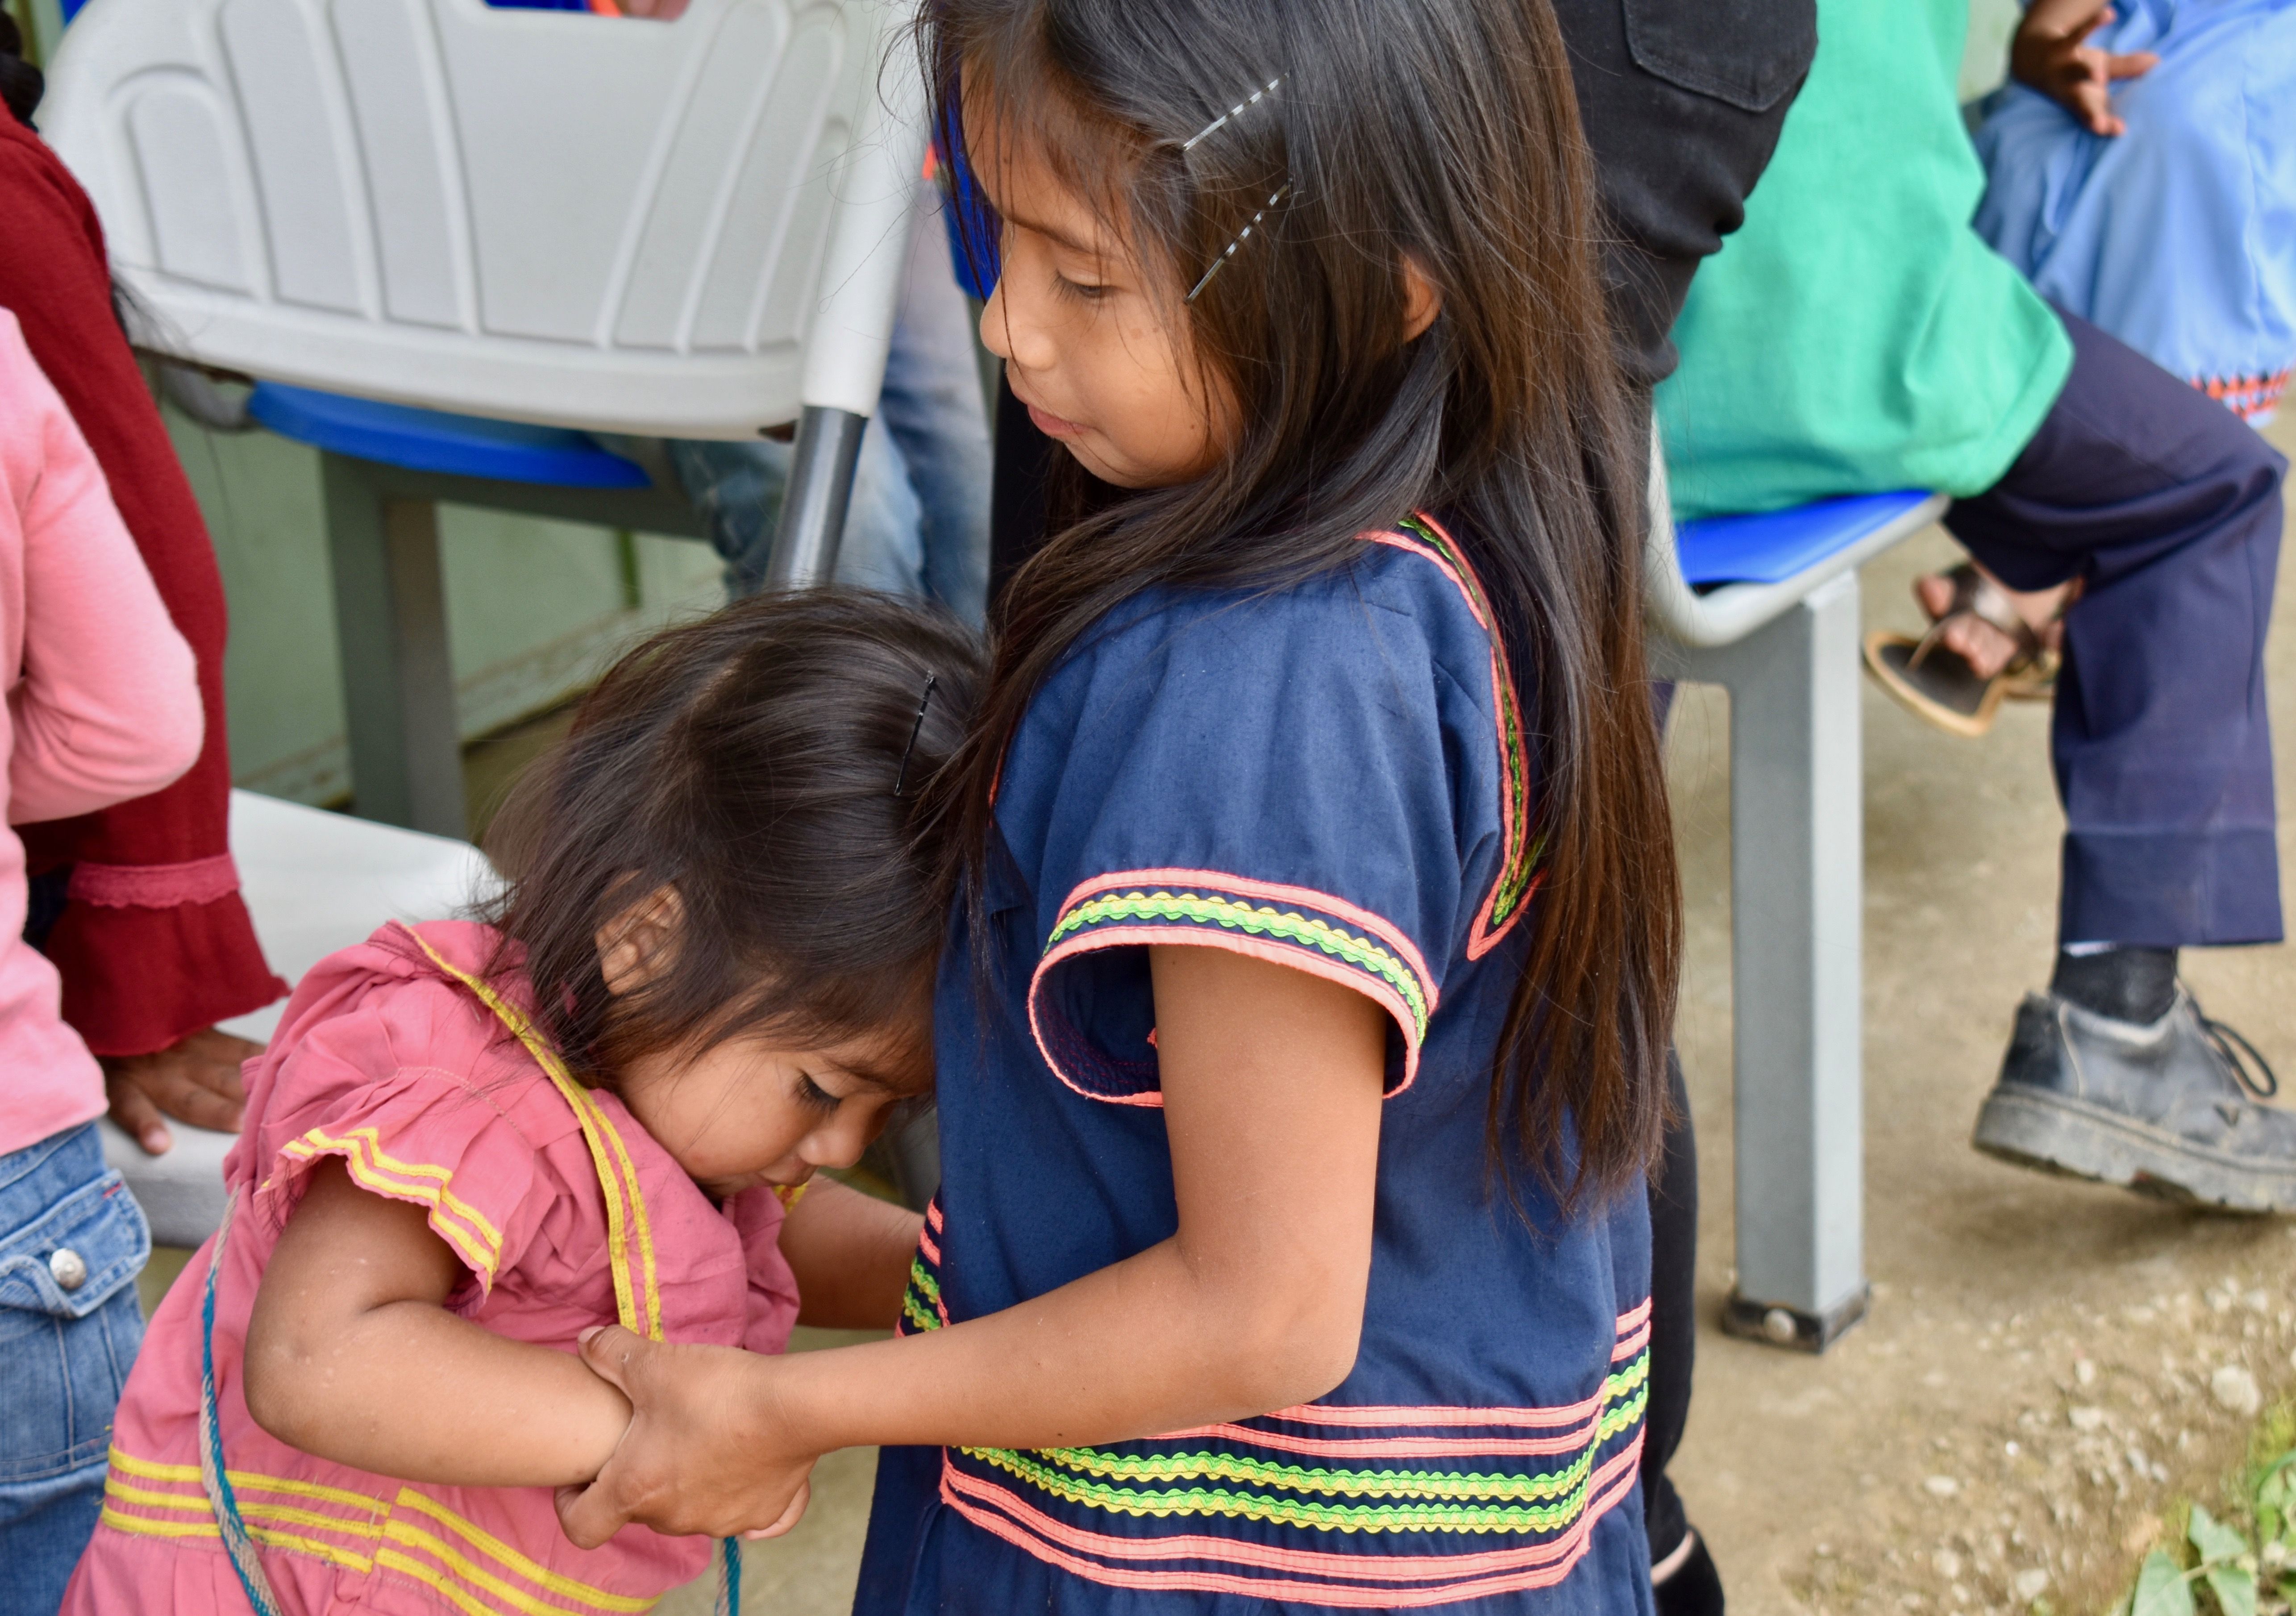 Distance and rural settings make access to larger cities difficult for some. A young girl leans on her sister after traveling several hours by foot to visit a health clinic in Las Mellizas, the largest town near their home. Image by Samira Tella. Costa Rica, 2018. 